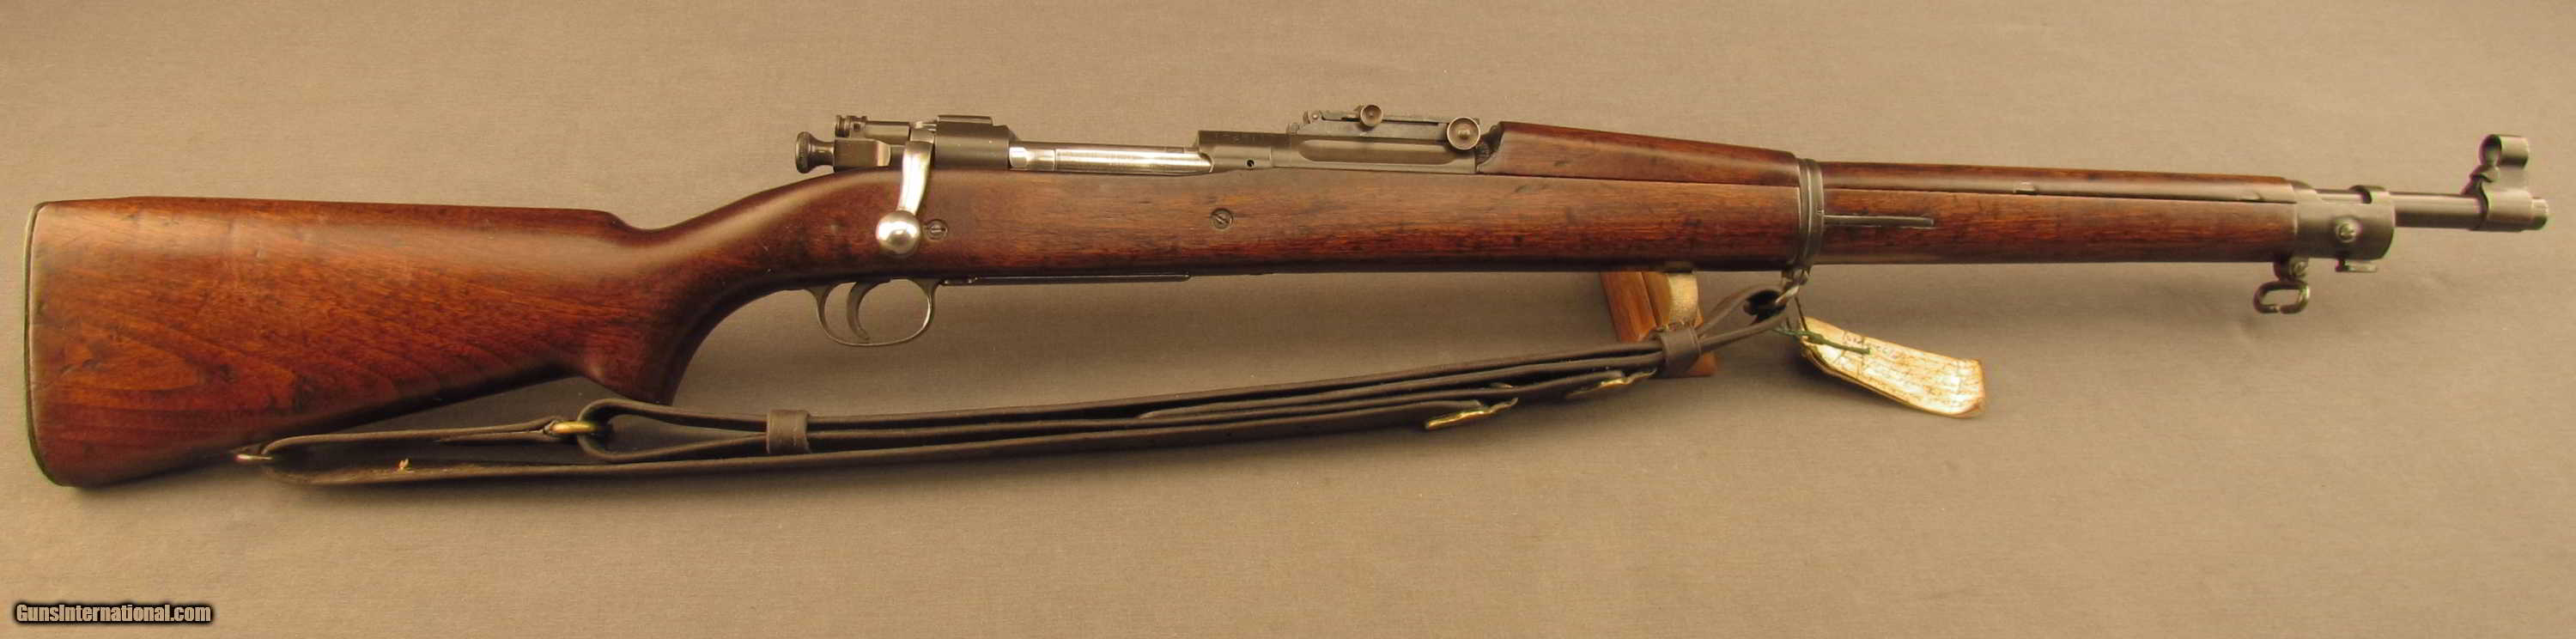 Springfield National Match Rifle  1903A1 From WW2 Vet s Estate